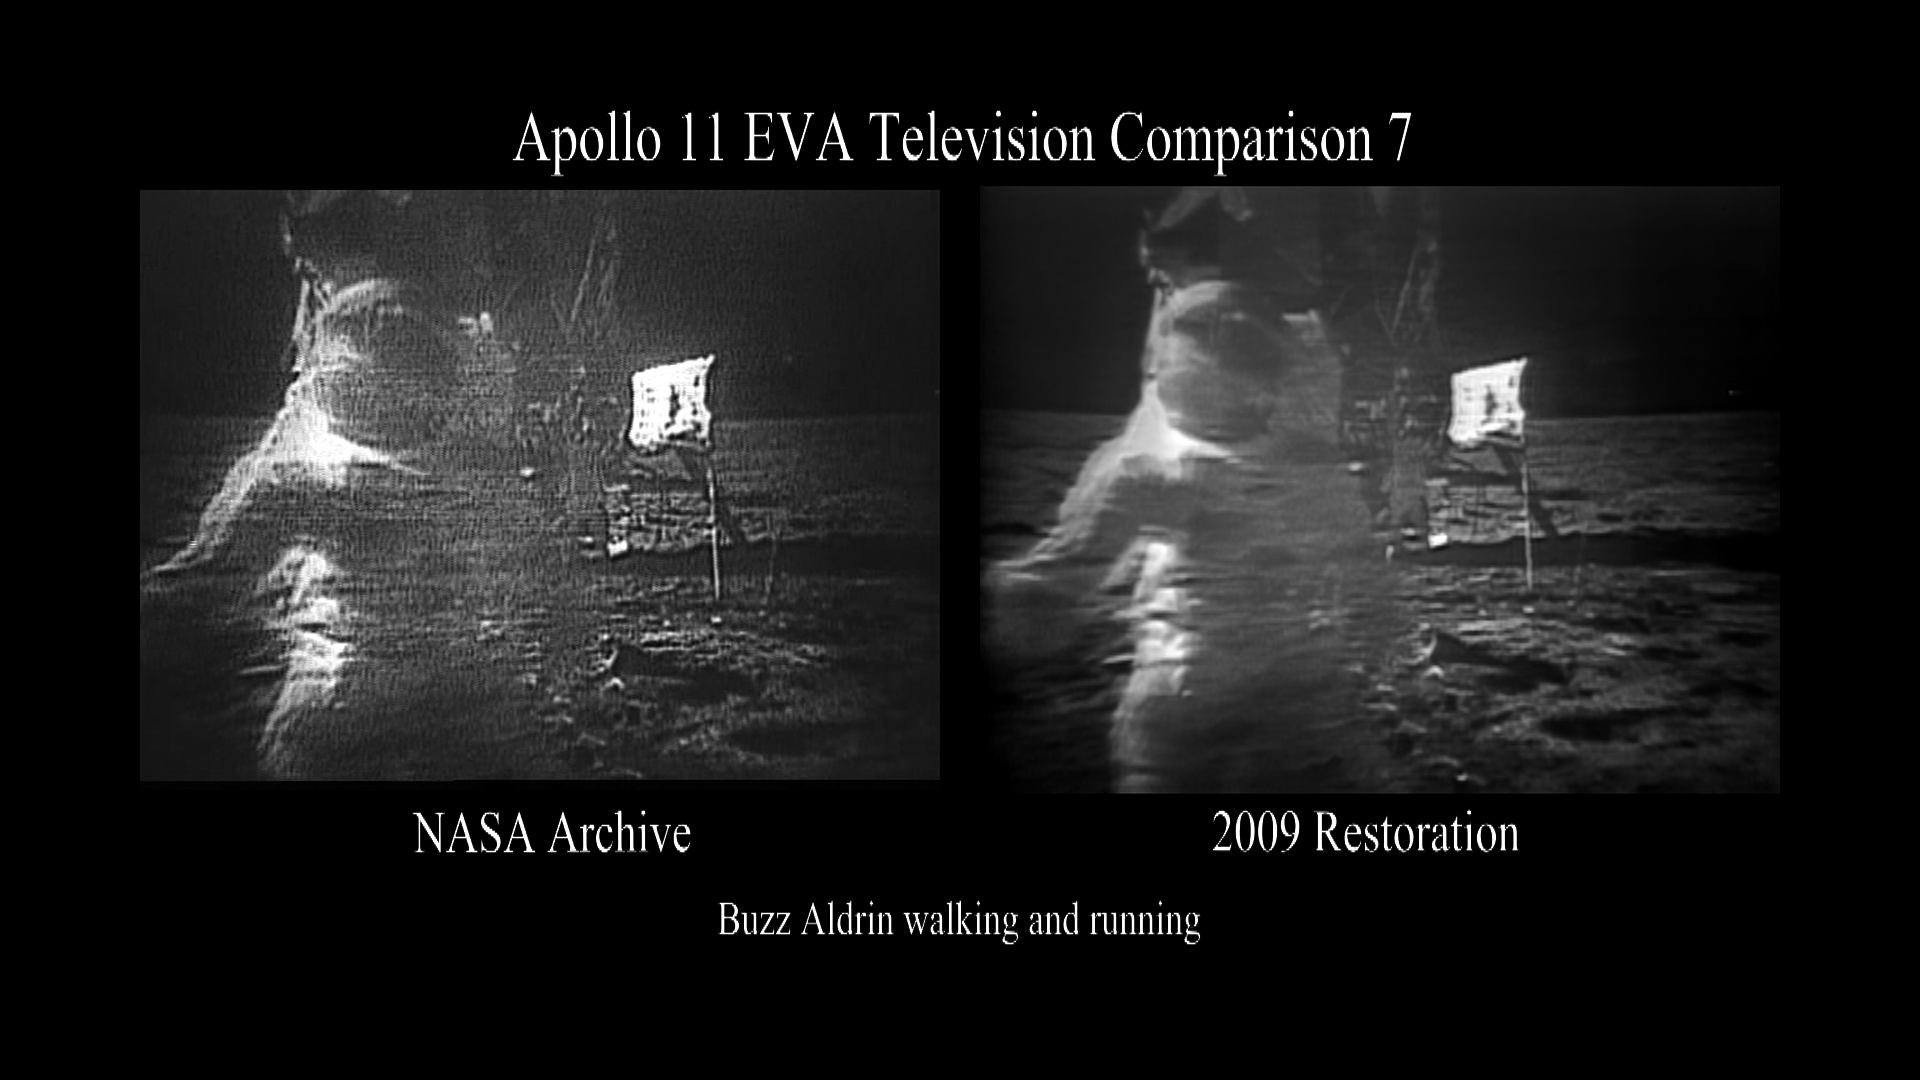 A side by side comparison of the original broadcast video and partially restored video of Buzz Aldrin walking and running.